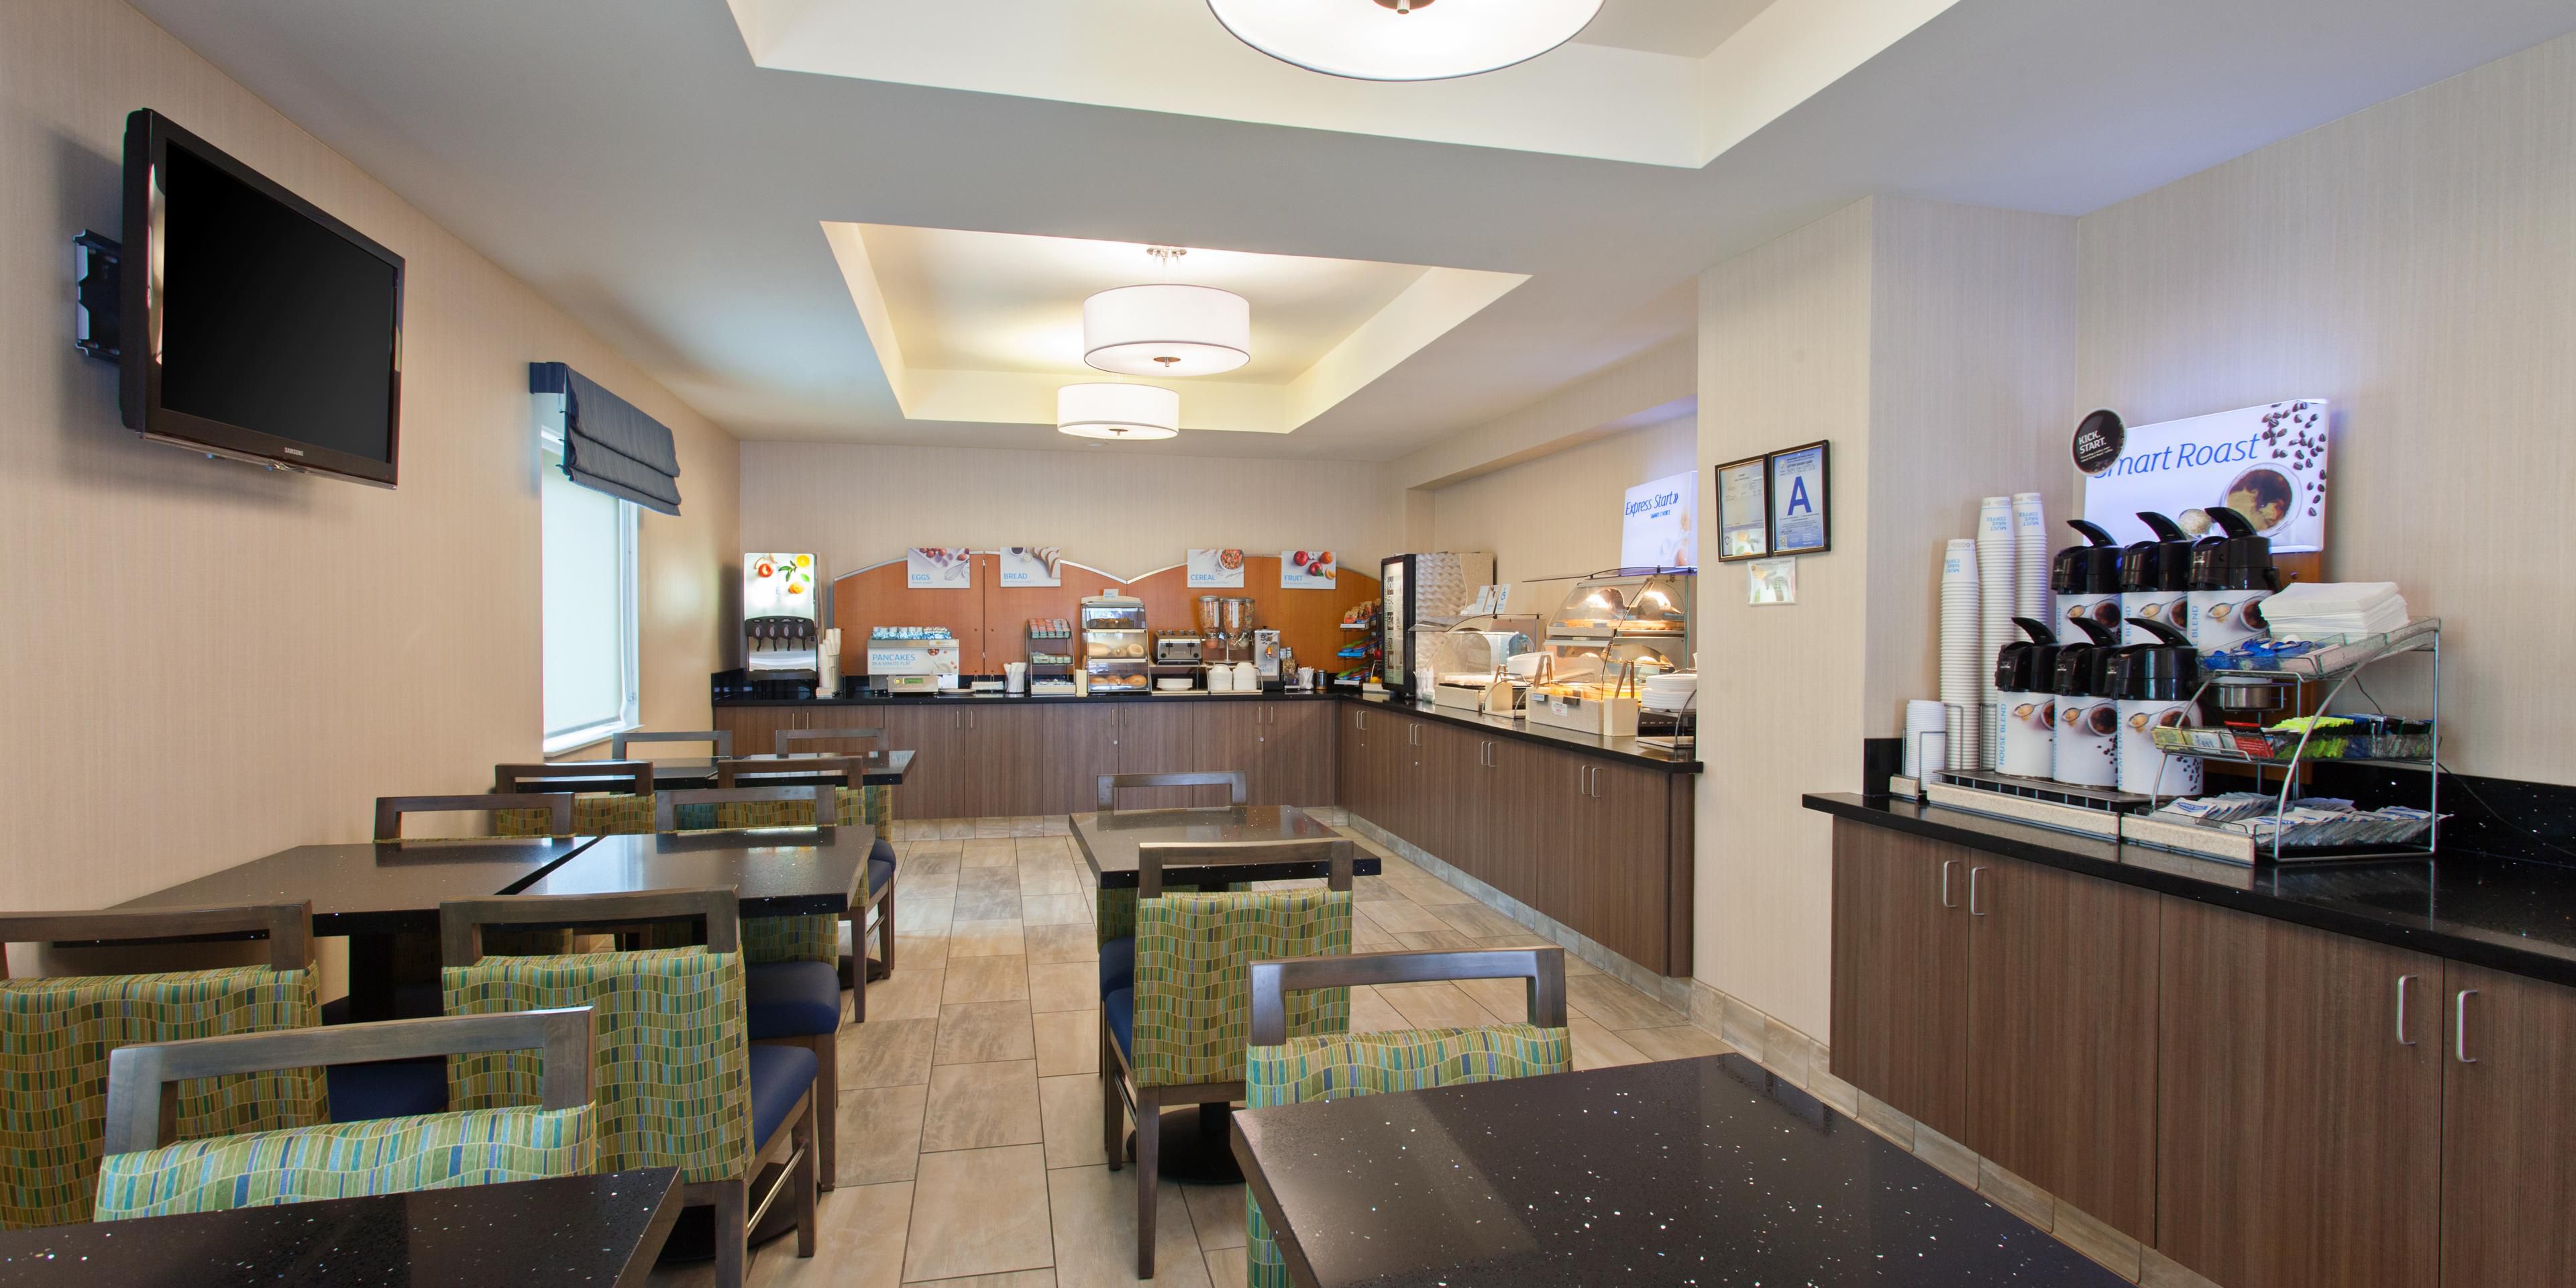 Enjoy complimentary parking, complimentary high speed Wi-Fi, and a complimentary quality hot breakfast for your family during every stay at Holiday Inn Express Colton Riverside North. The Holiday Inn Express Start breakfast bar offers a wide variety of hot and cold options including a rotation of egg and meat selections, biscuits, fruit and more! 